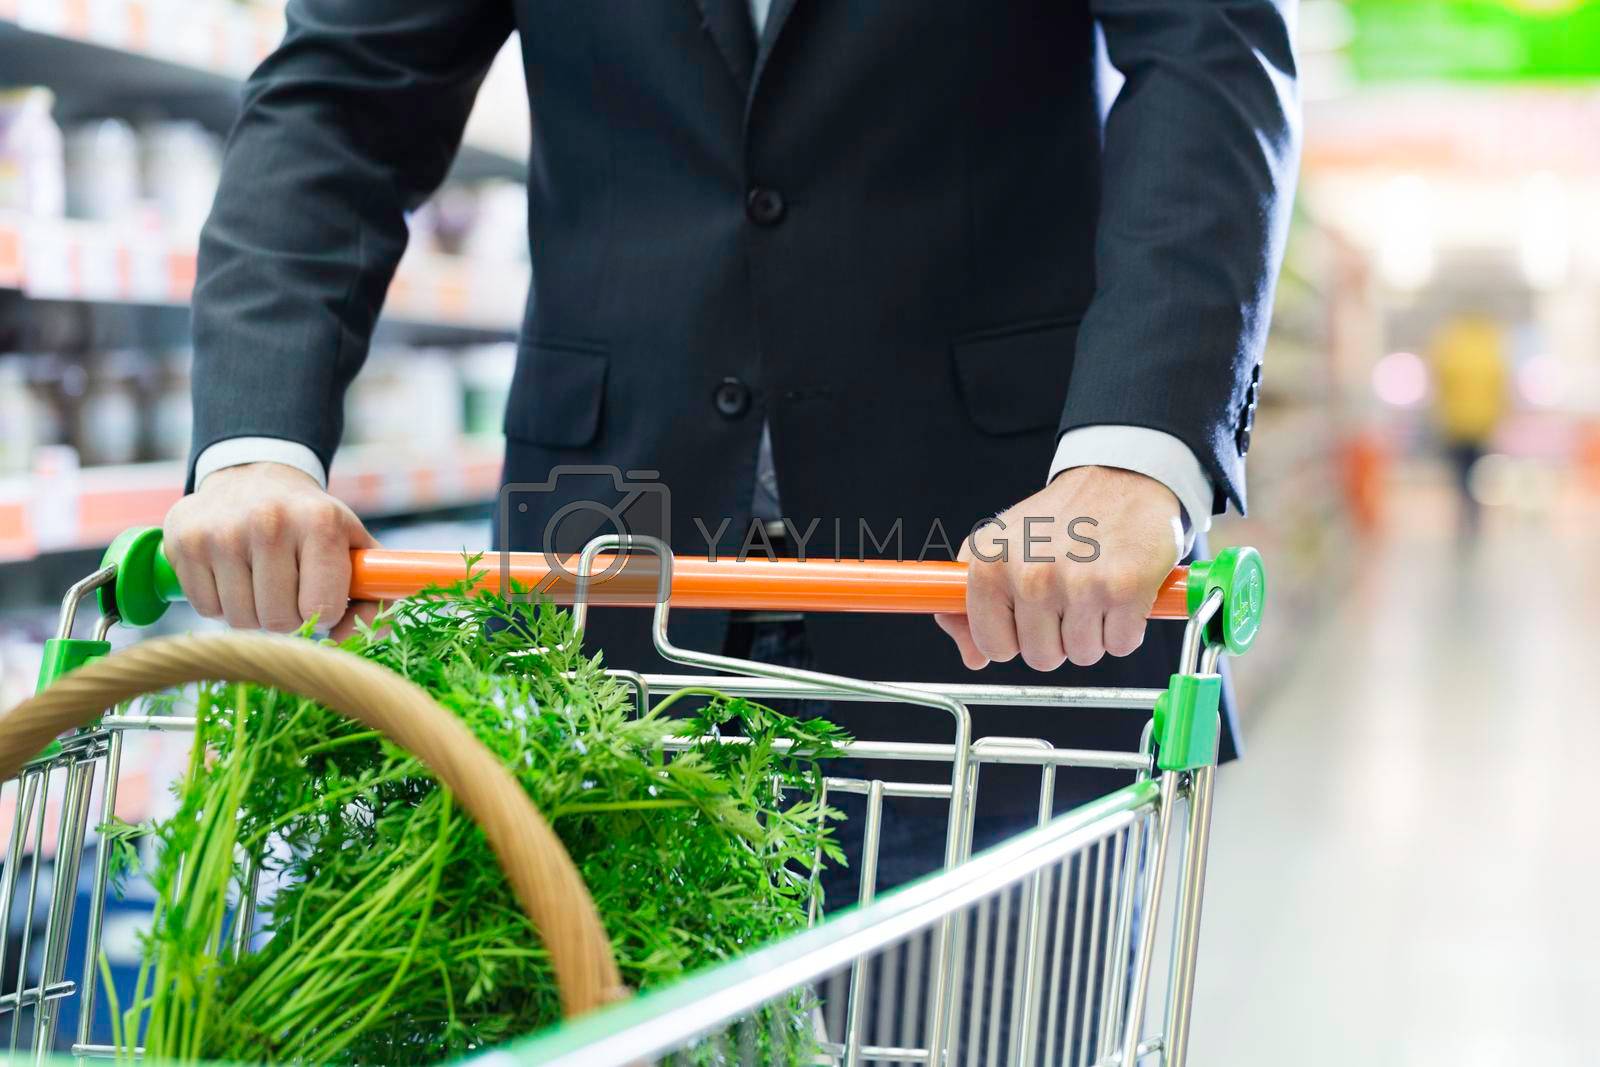 Royalty free image of man with shopping cart in supermarket by Kzenon